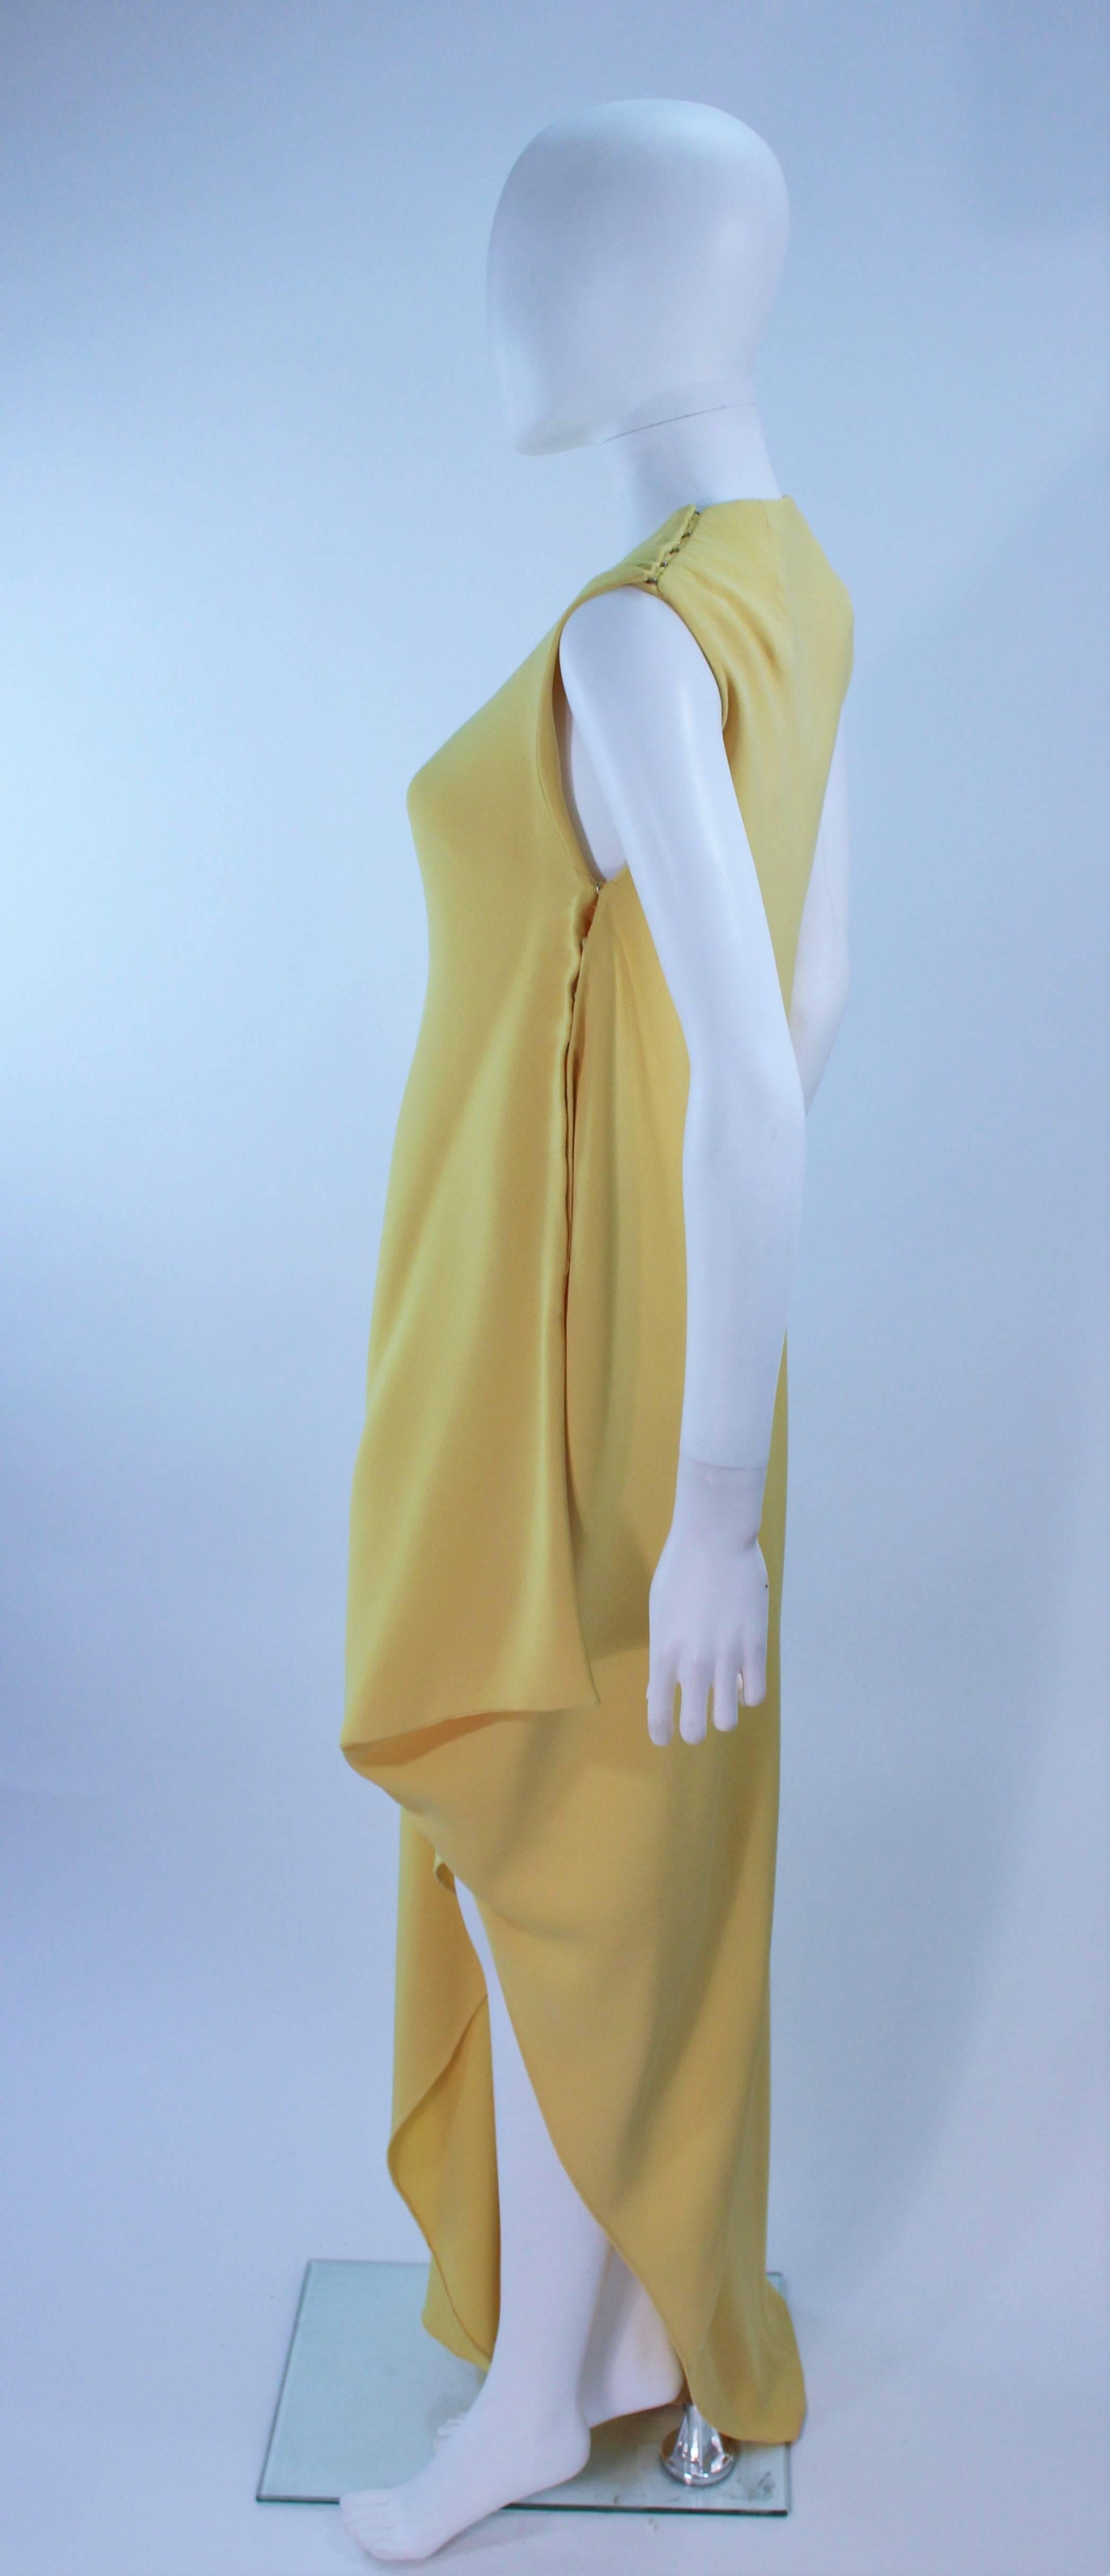 MADAME GRES HAUTE COUTURE Betsy Bloomingdale 1960's Yellow Asymmetrical Gown In Excellent Condition For Sale In Los Angeles, CA